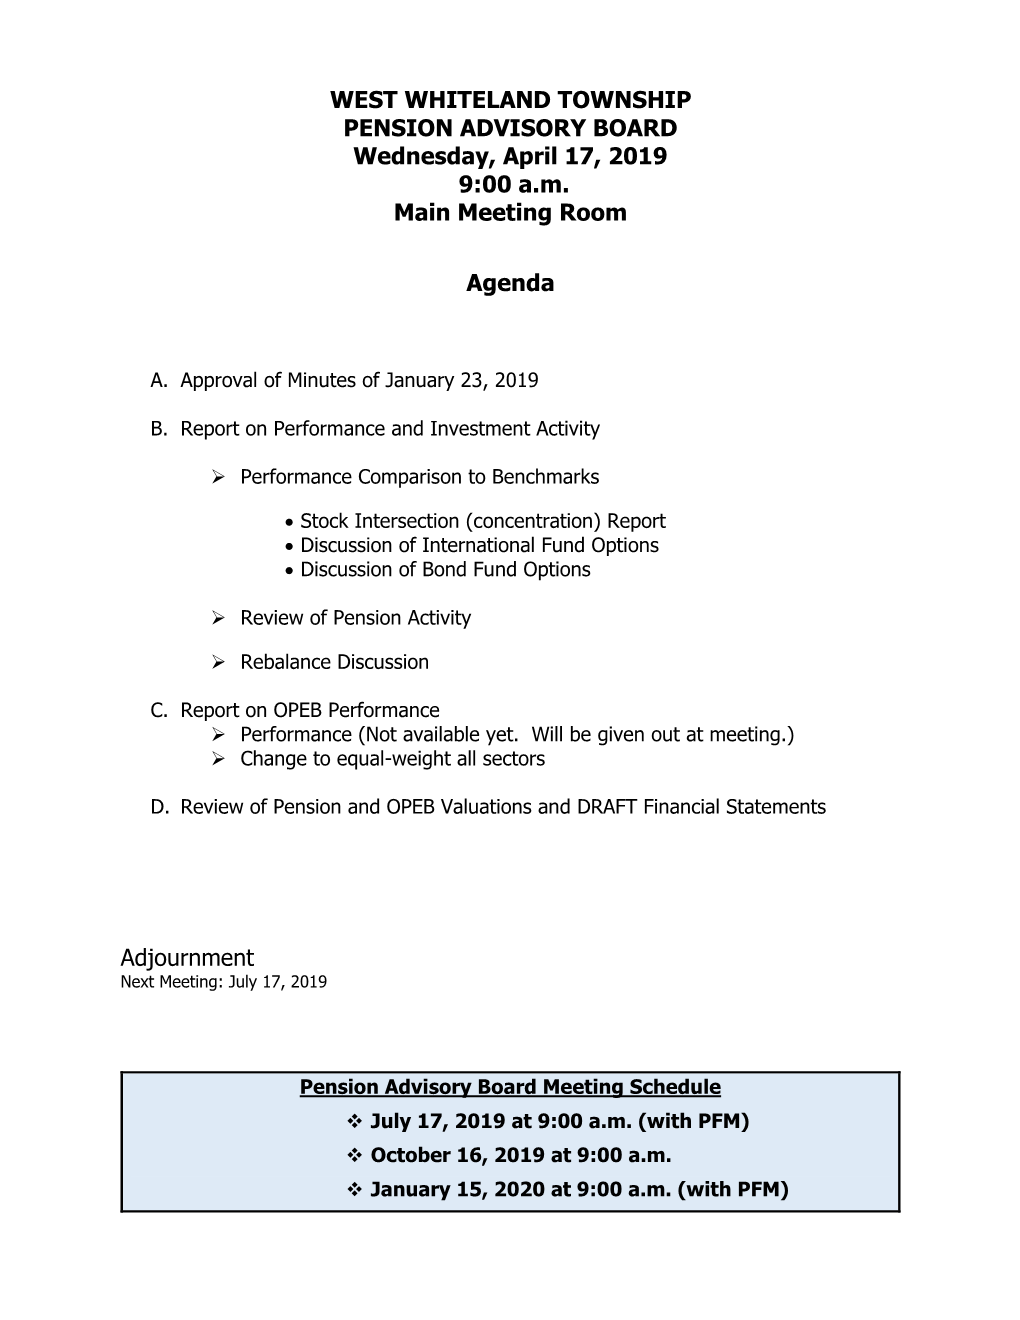 WEST WHITELAND TOWNSHIP PENSION ADVISORY BOARD Wednesday, April 17, 2019 9:00 A.M